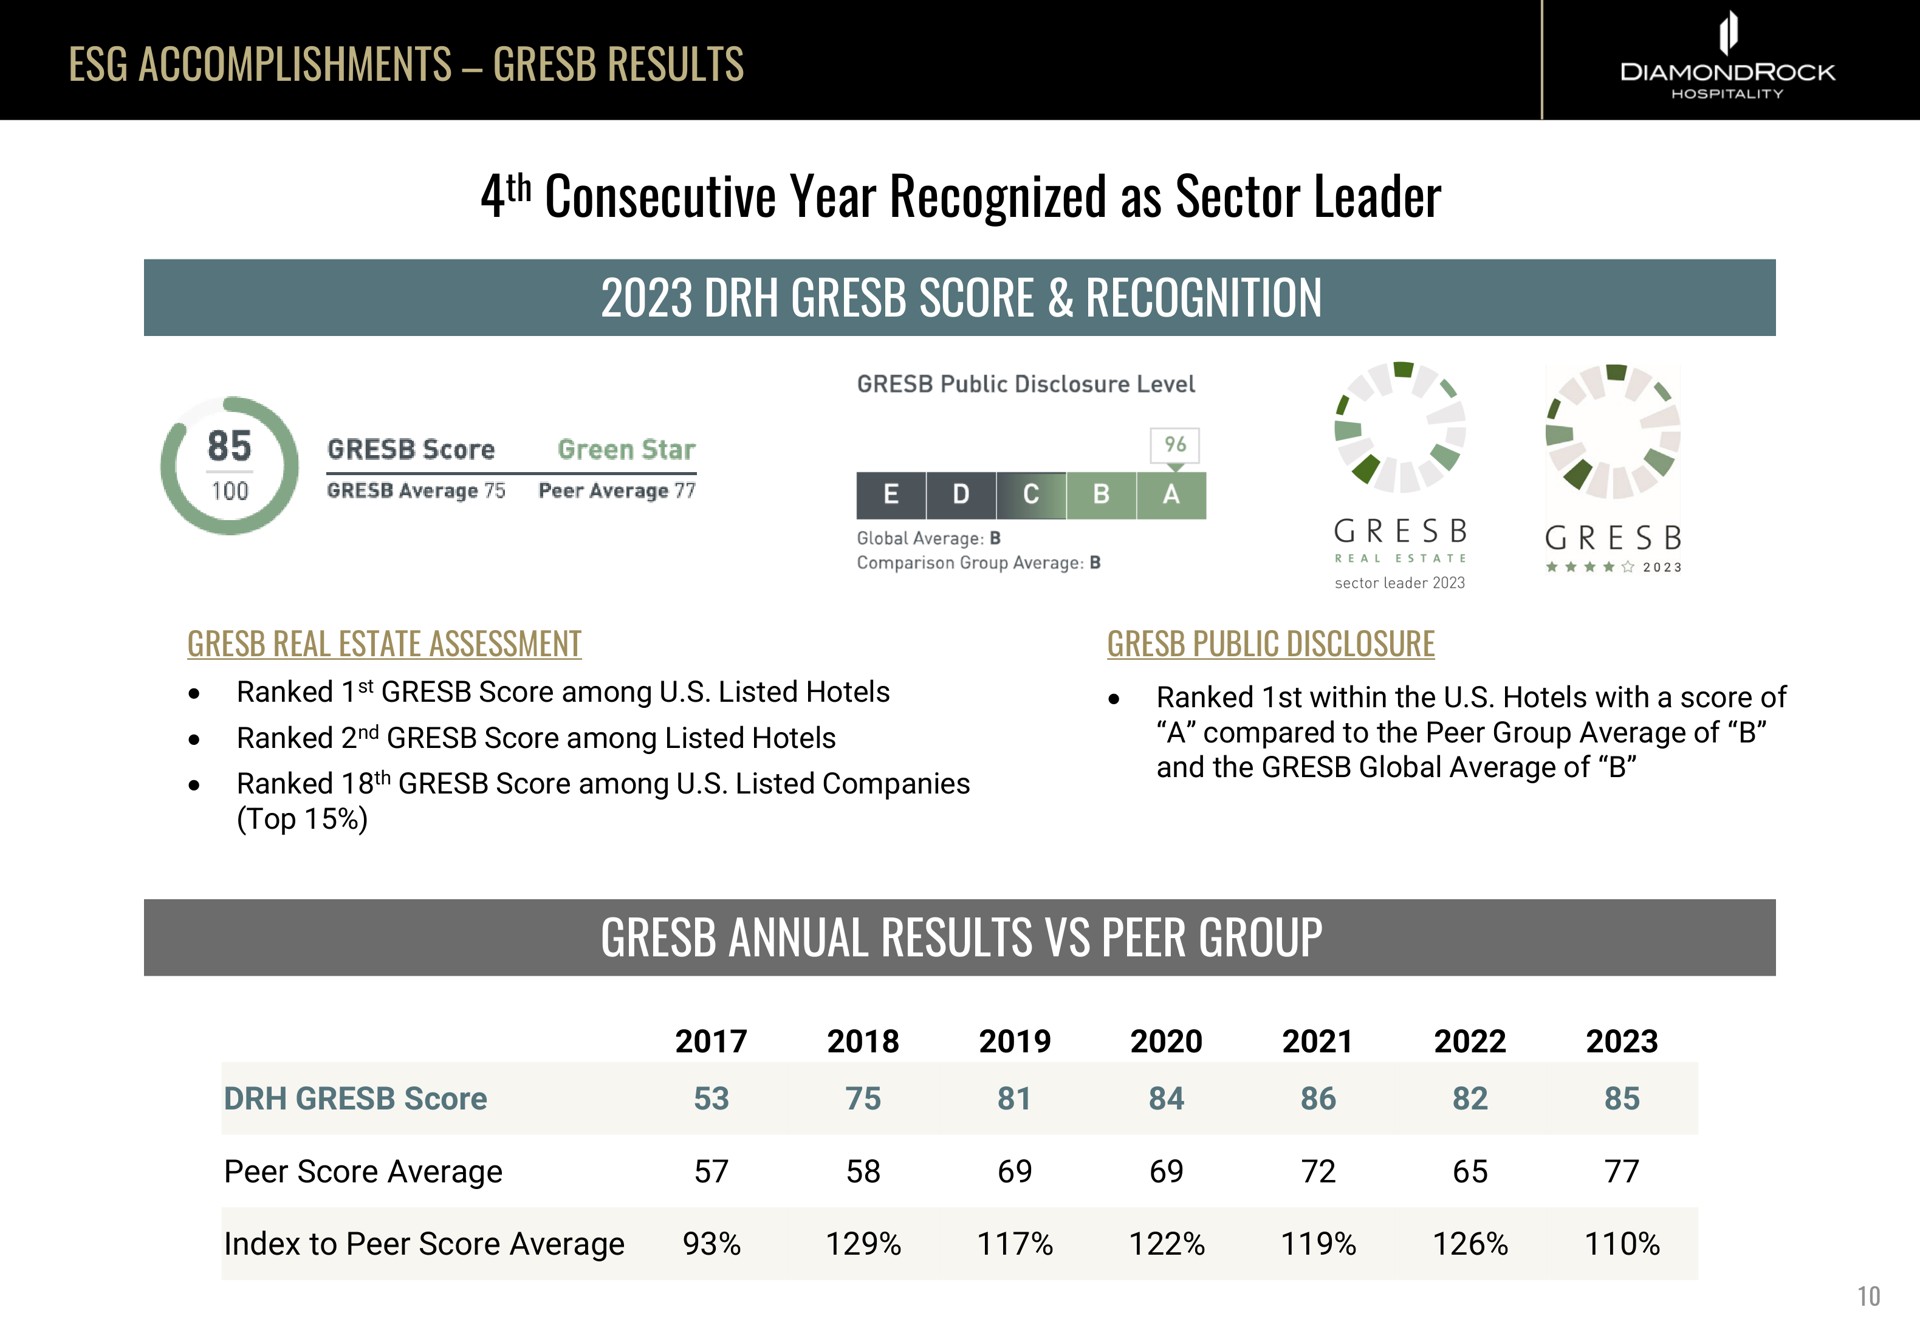 accomplishments results consecutive year recognized as sector leader score recognition annual results peer group arn to ranked among listed hotels ranked among listed hotels ranked within the hotels with a of a compared to the average of lee | DiamondRock Hospitality